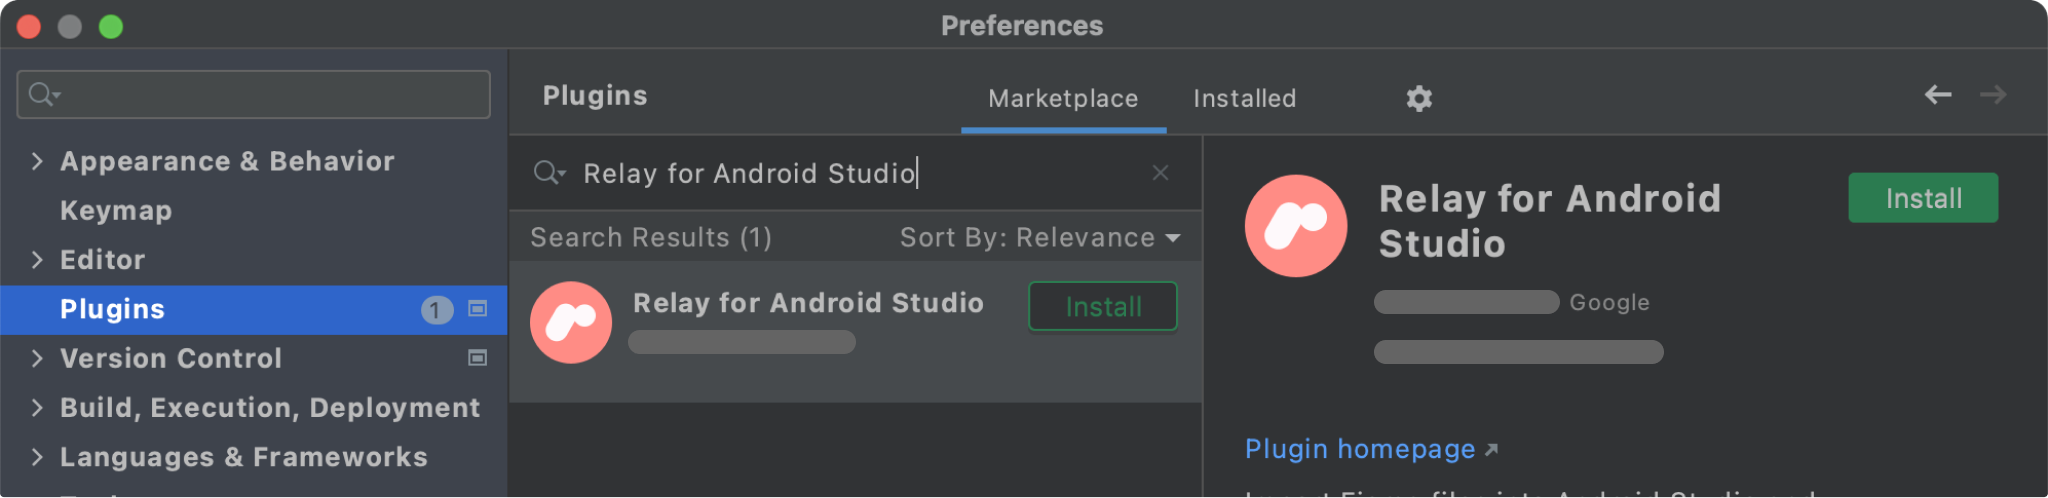 Marketplace의 Relay for Android Studio